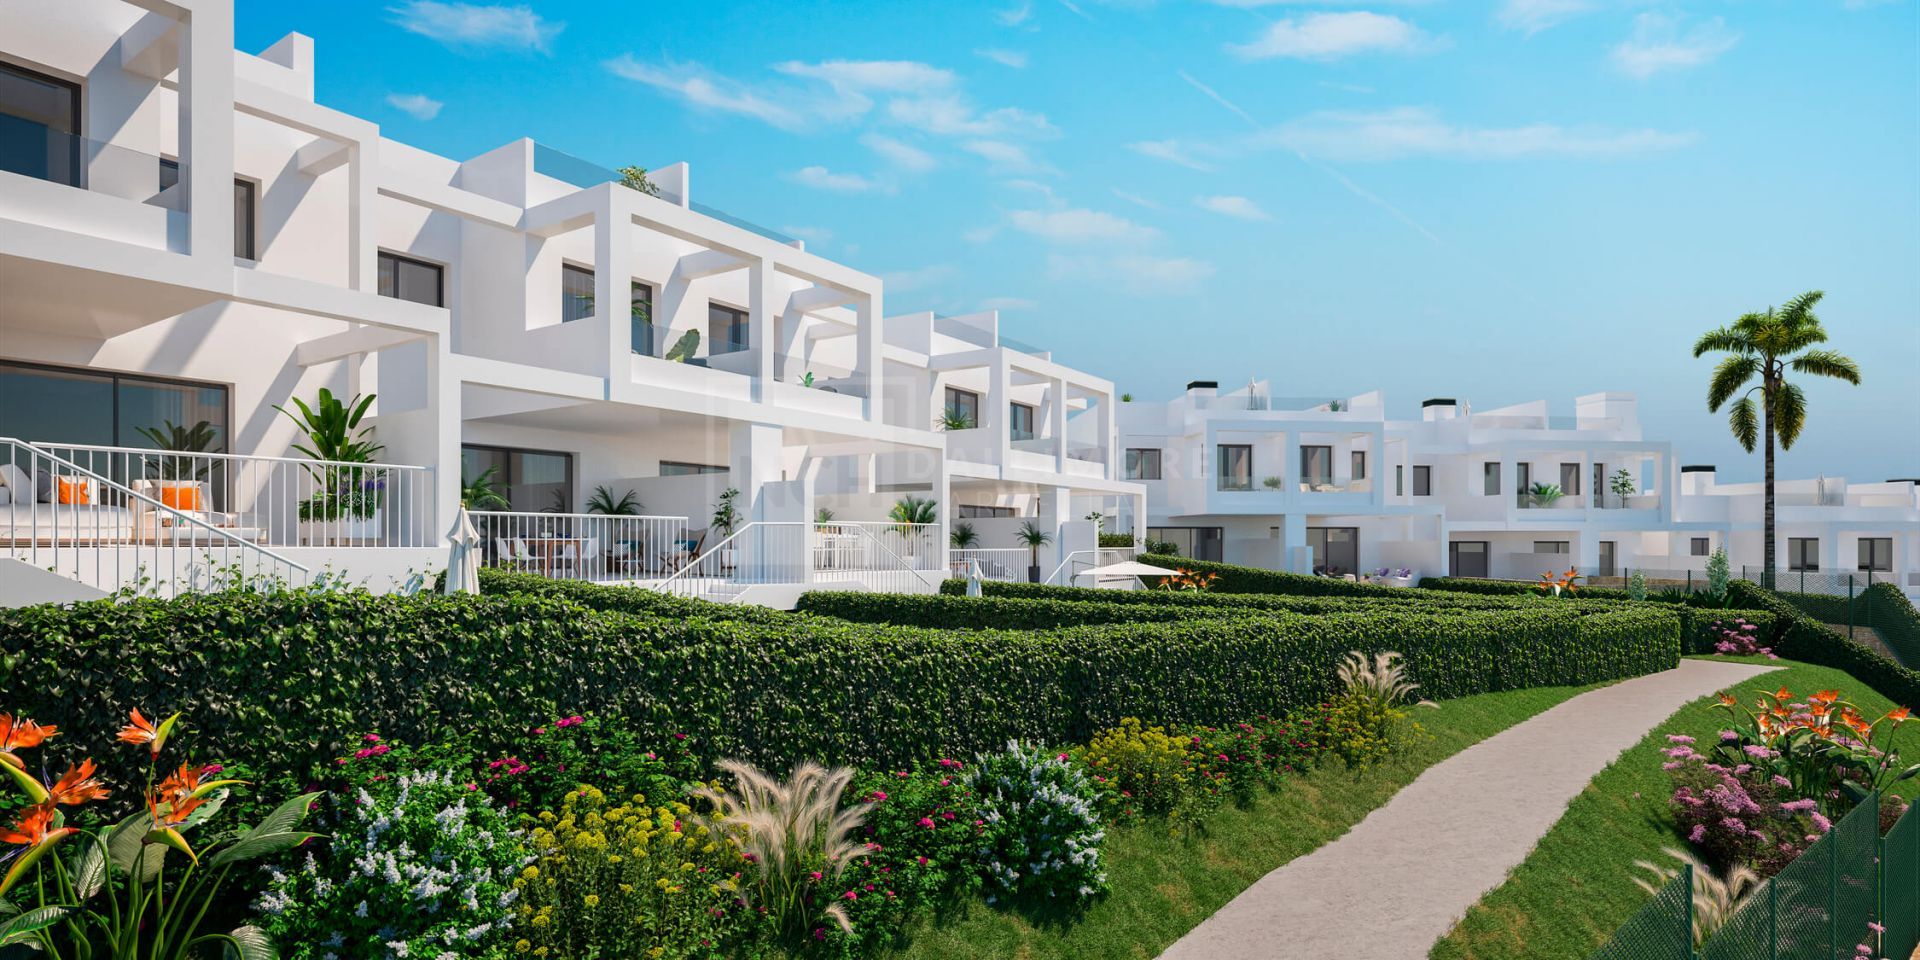 EXCELLENT VALUE BRAND NEW 3-BEDROOM TOWNHOUSE - CLOSE TO SOTOGRANDE